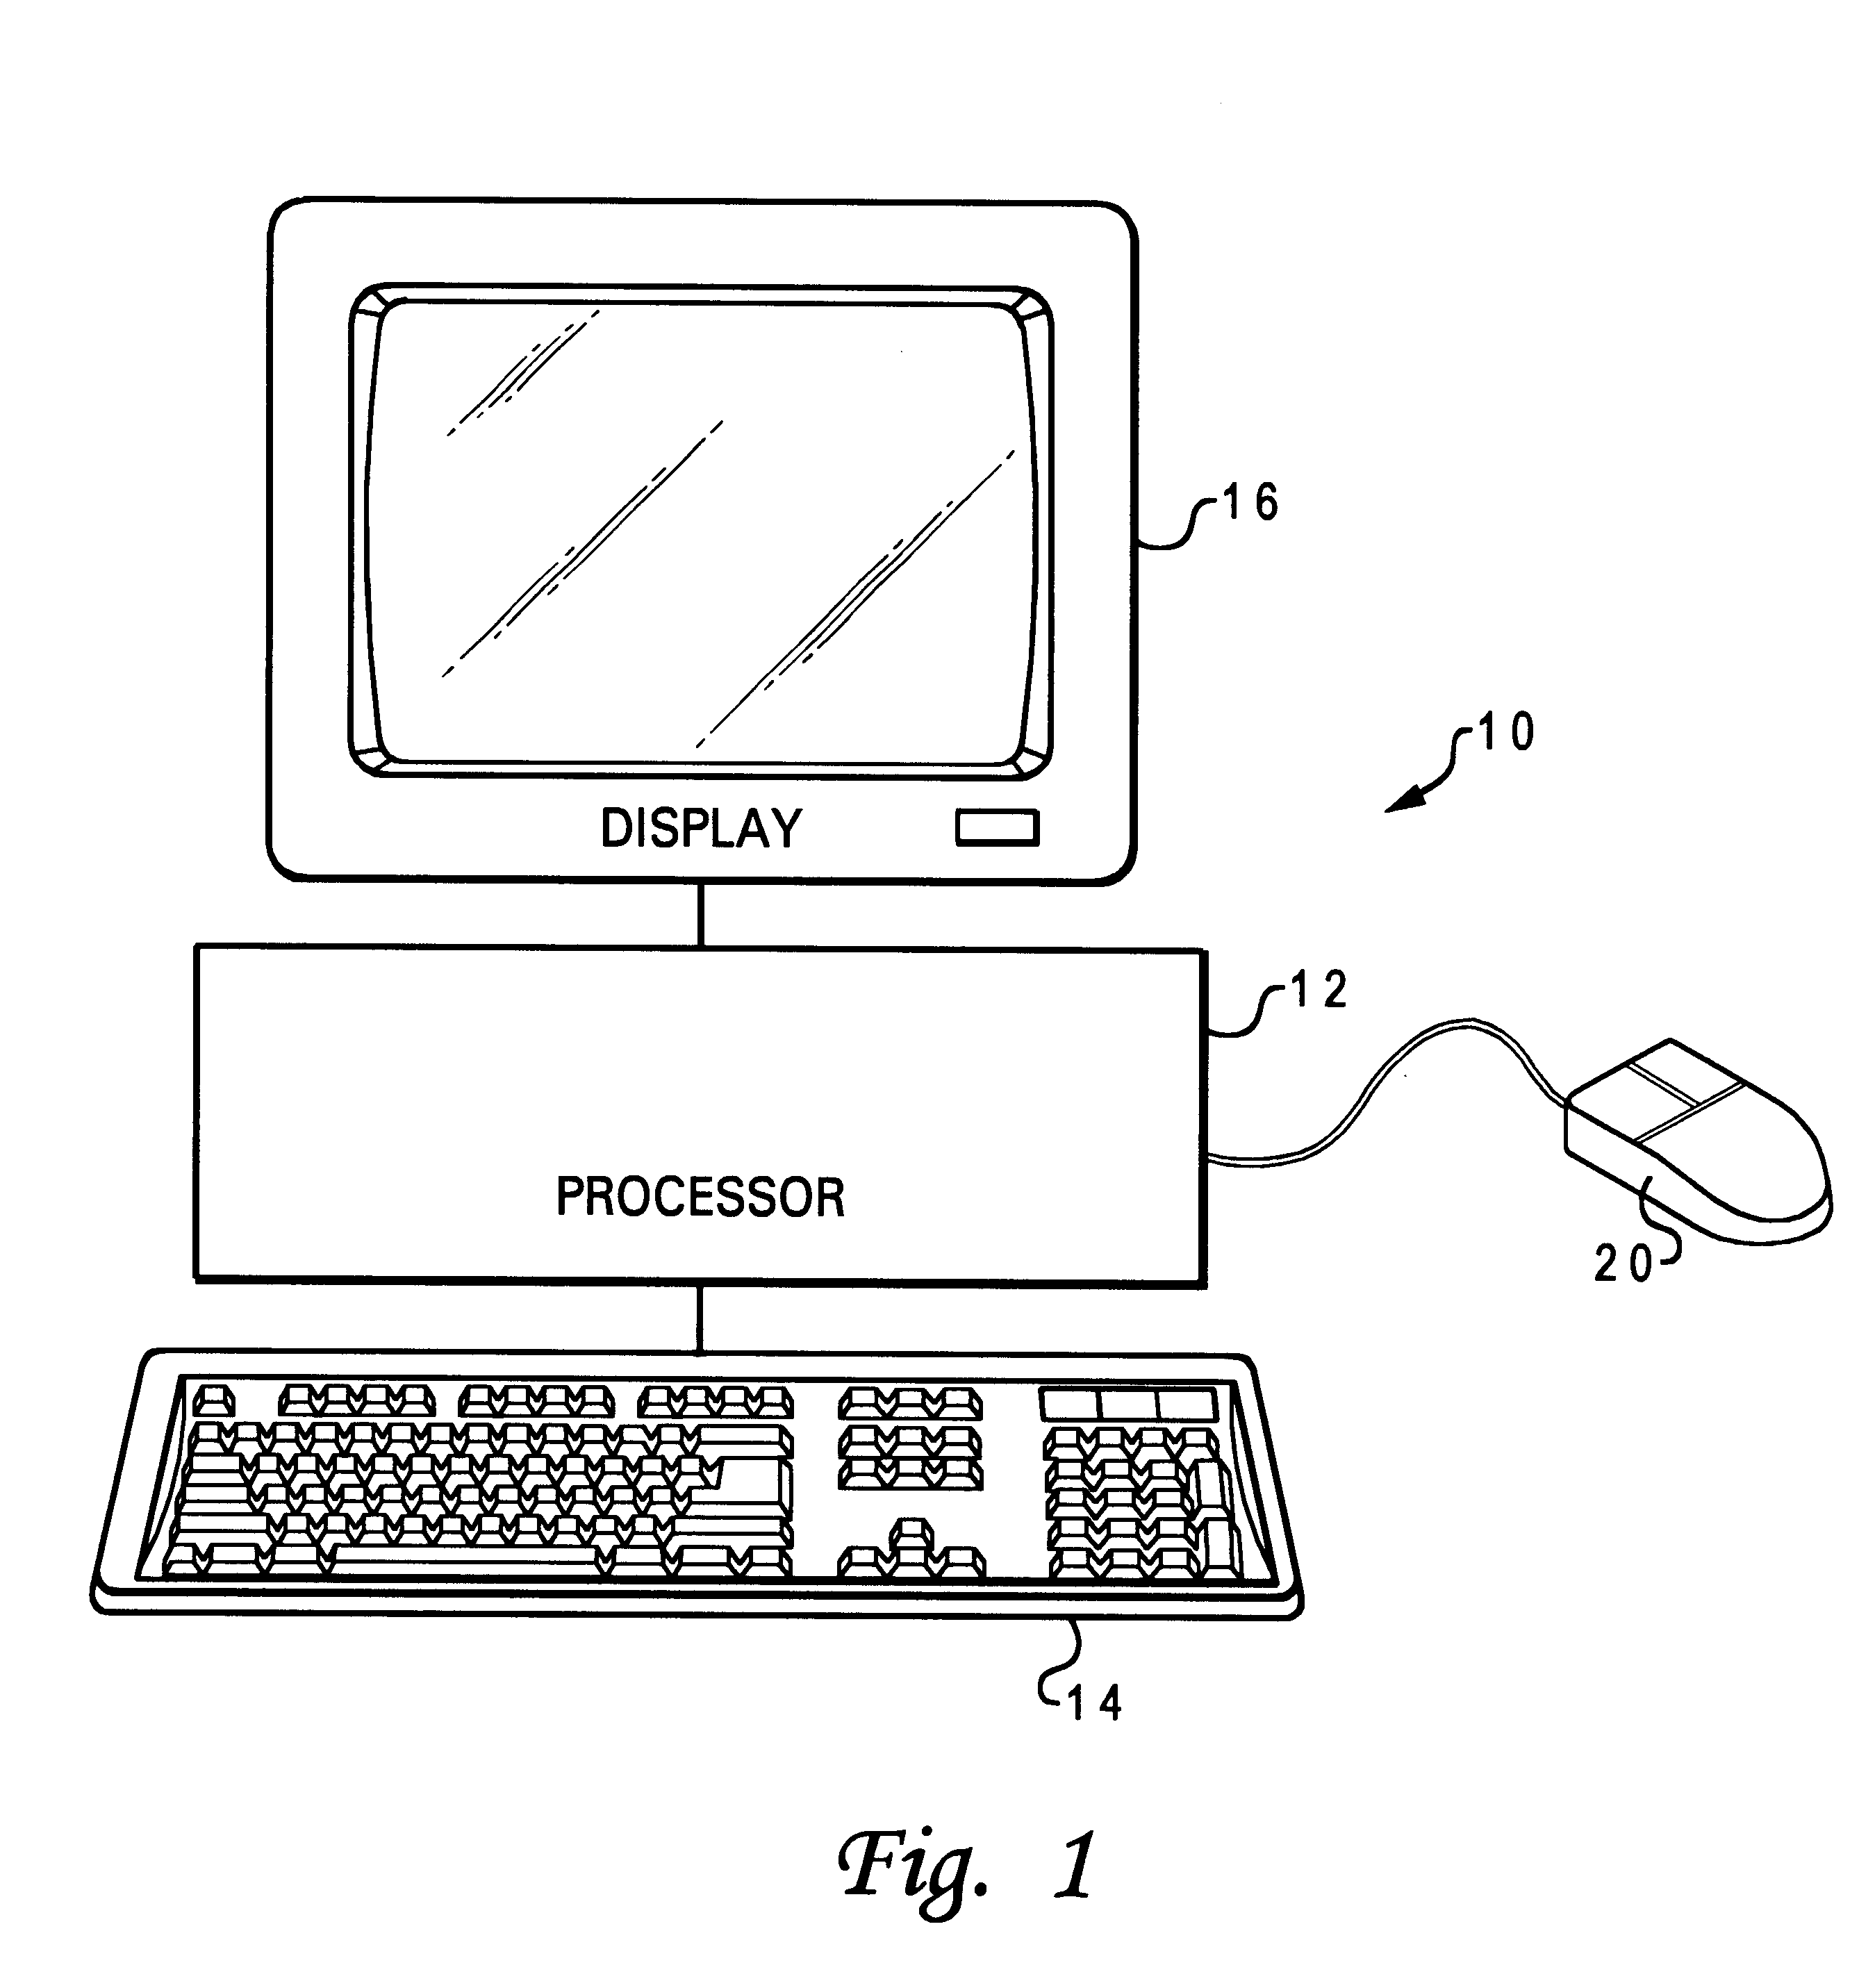 Method of storing and classifying selectable web page links and sublinks thereof to a predetermined depth in response to a single user input